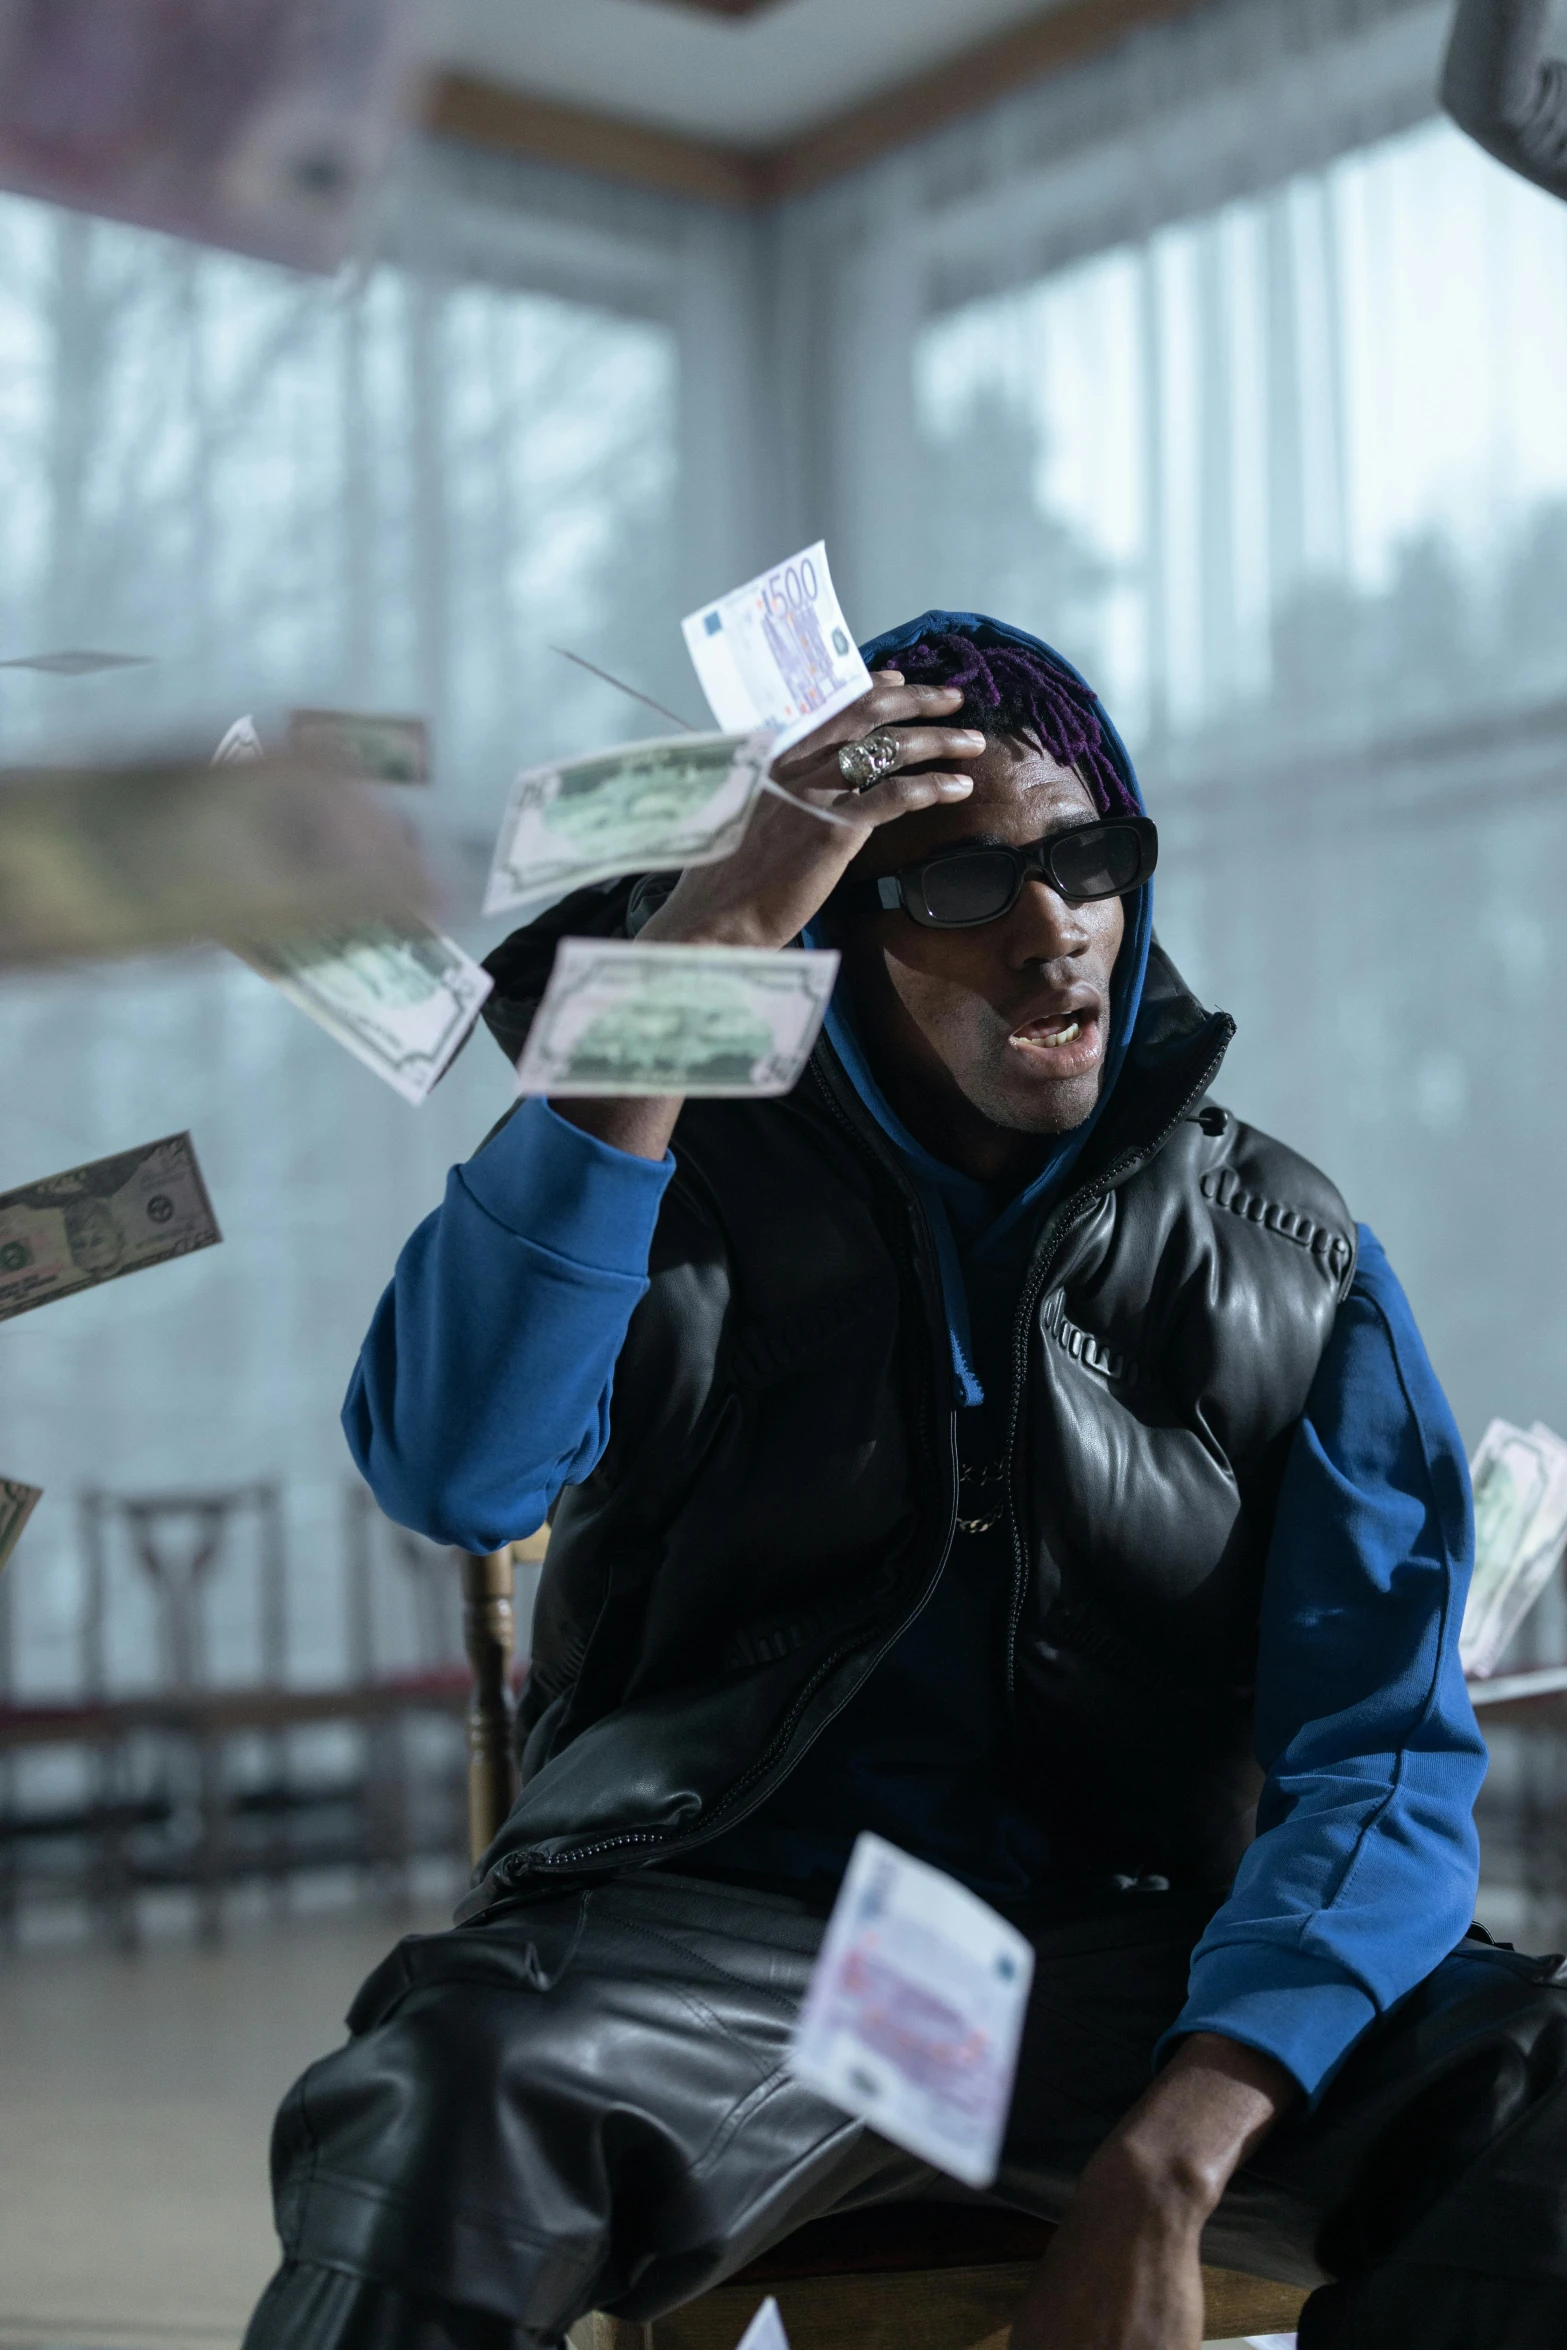 a man sitting in front of a pile of money, an album cover, pexels contest winner, visual art, ski mask, indoor scene, [ theatrical ], cold light